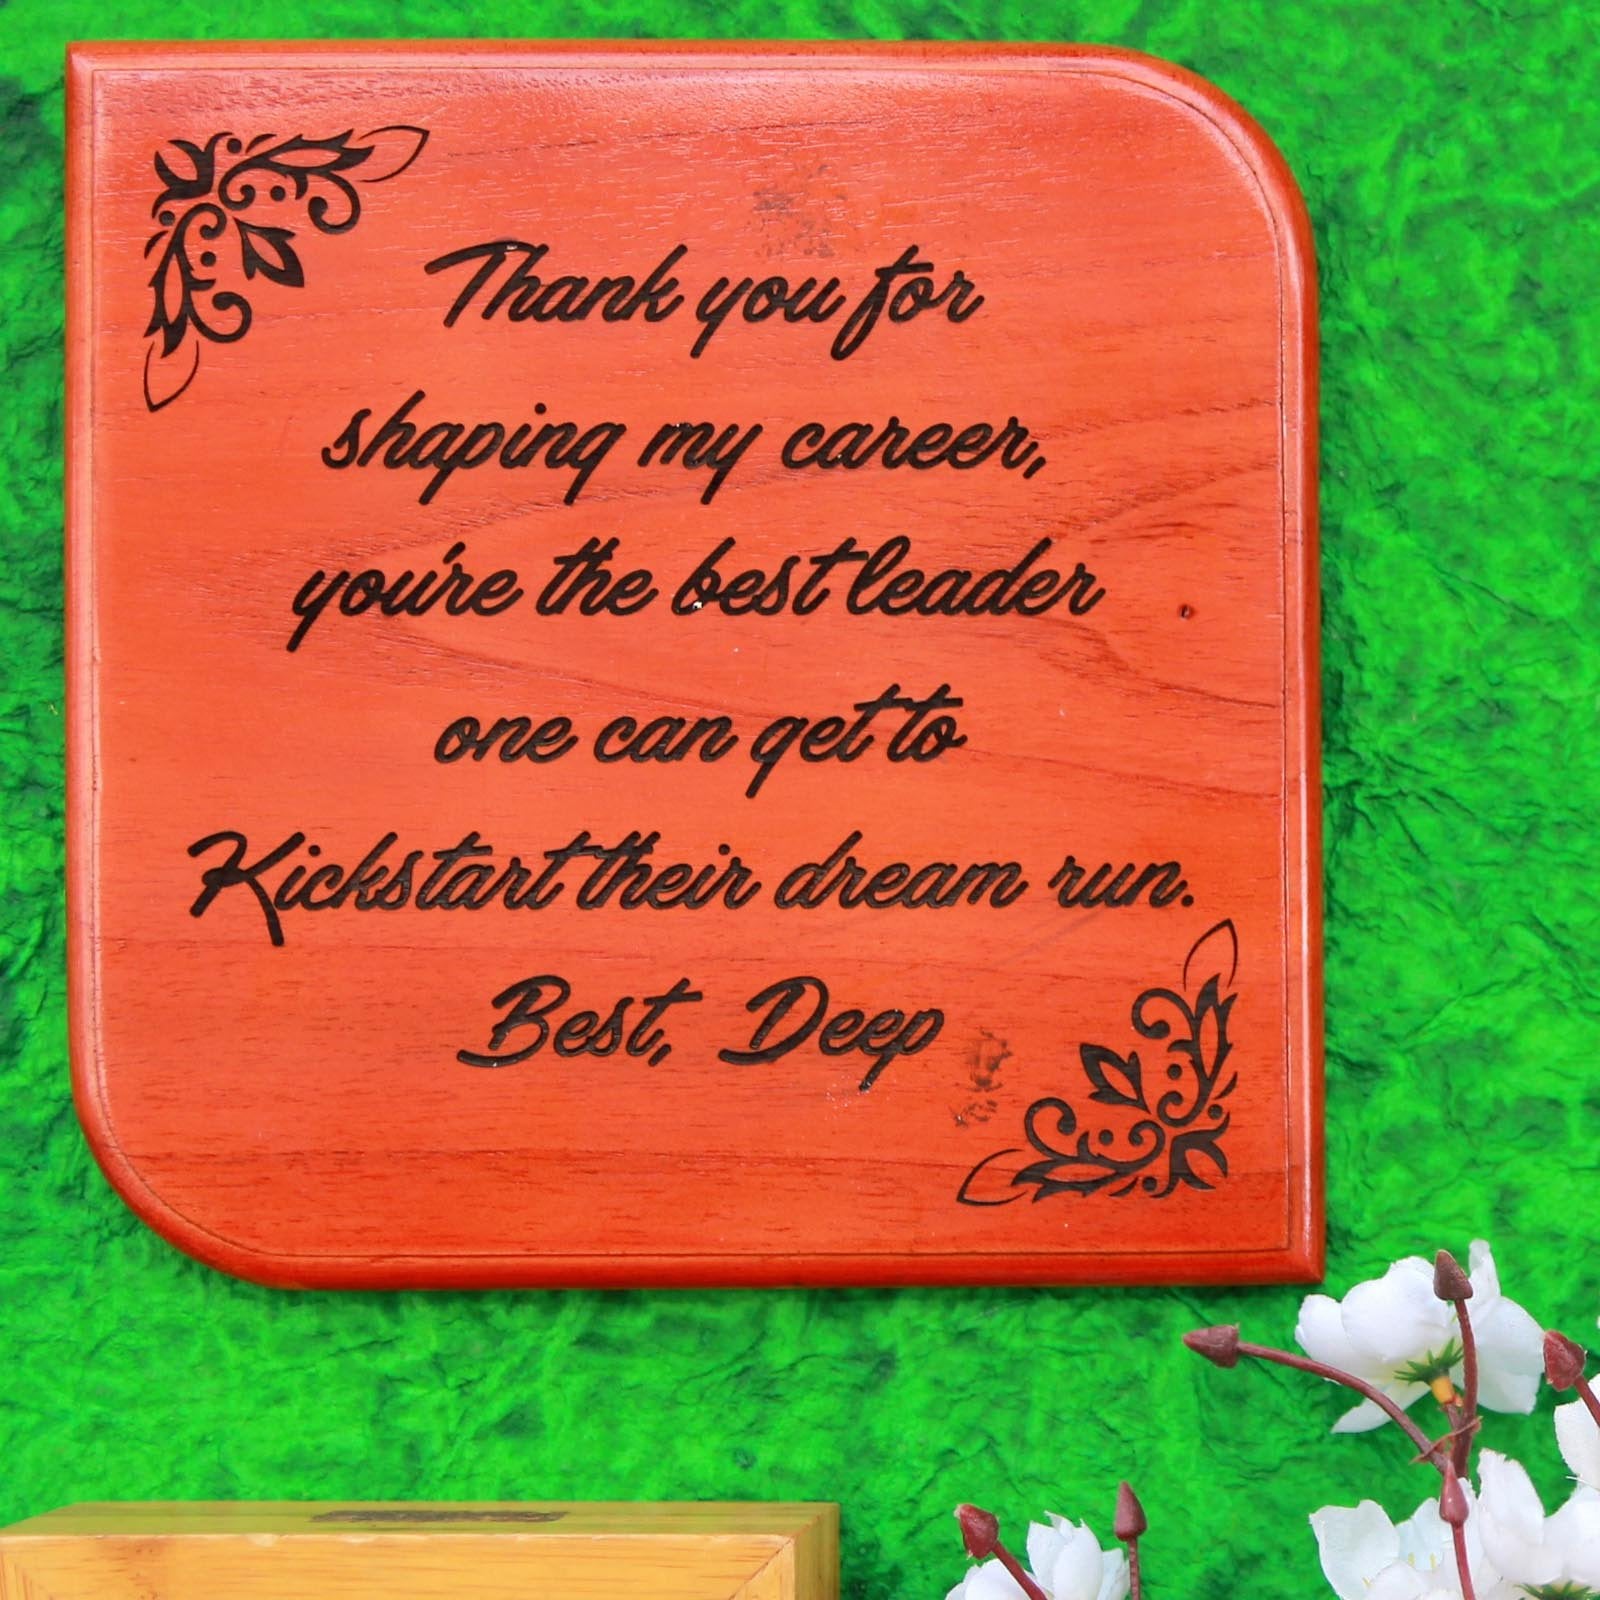 Thank you for shaping my career. You are the best leader one can get to kickstart their dream run. This wooden plaque makes great gifts for boss, gifts for managers or gifts for mentors. 